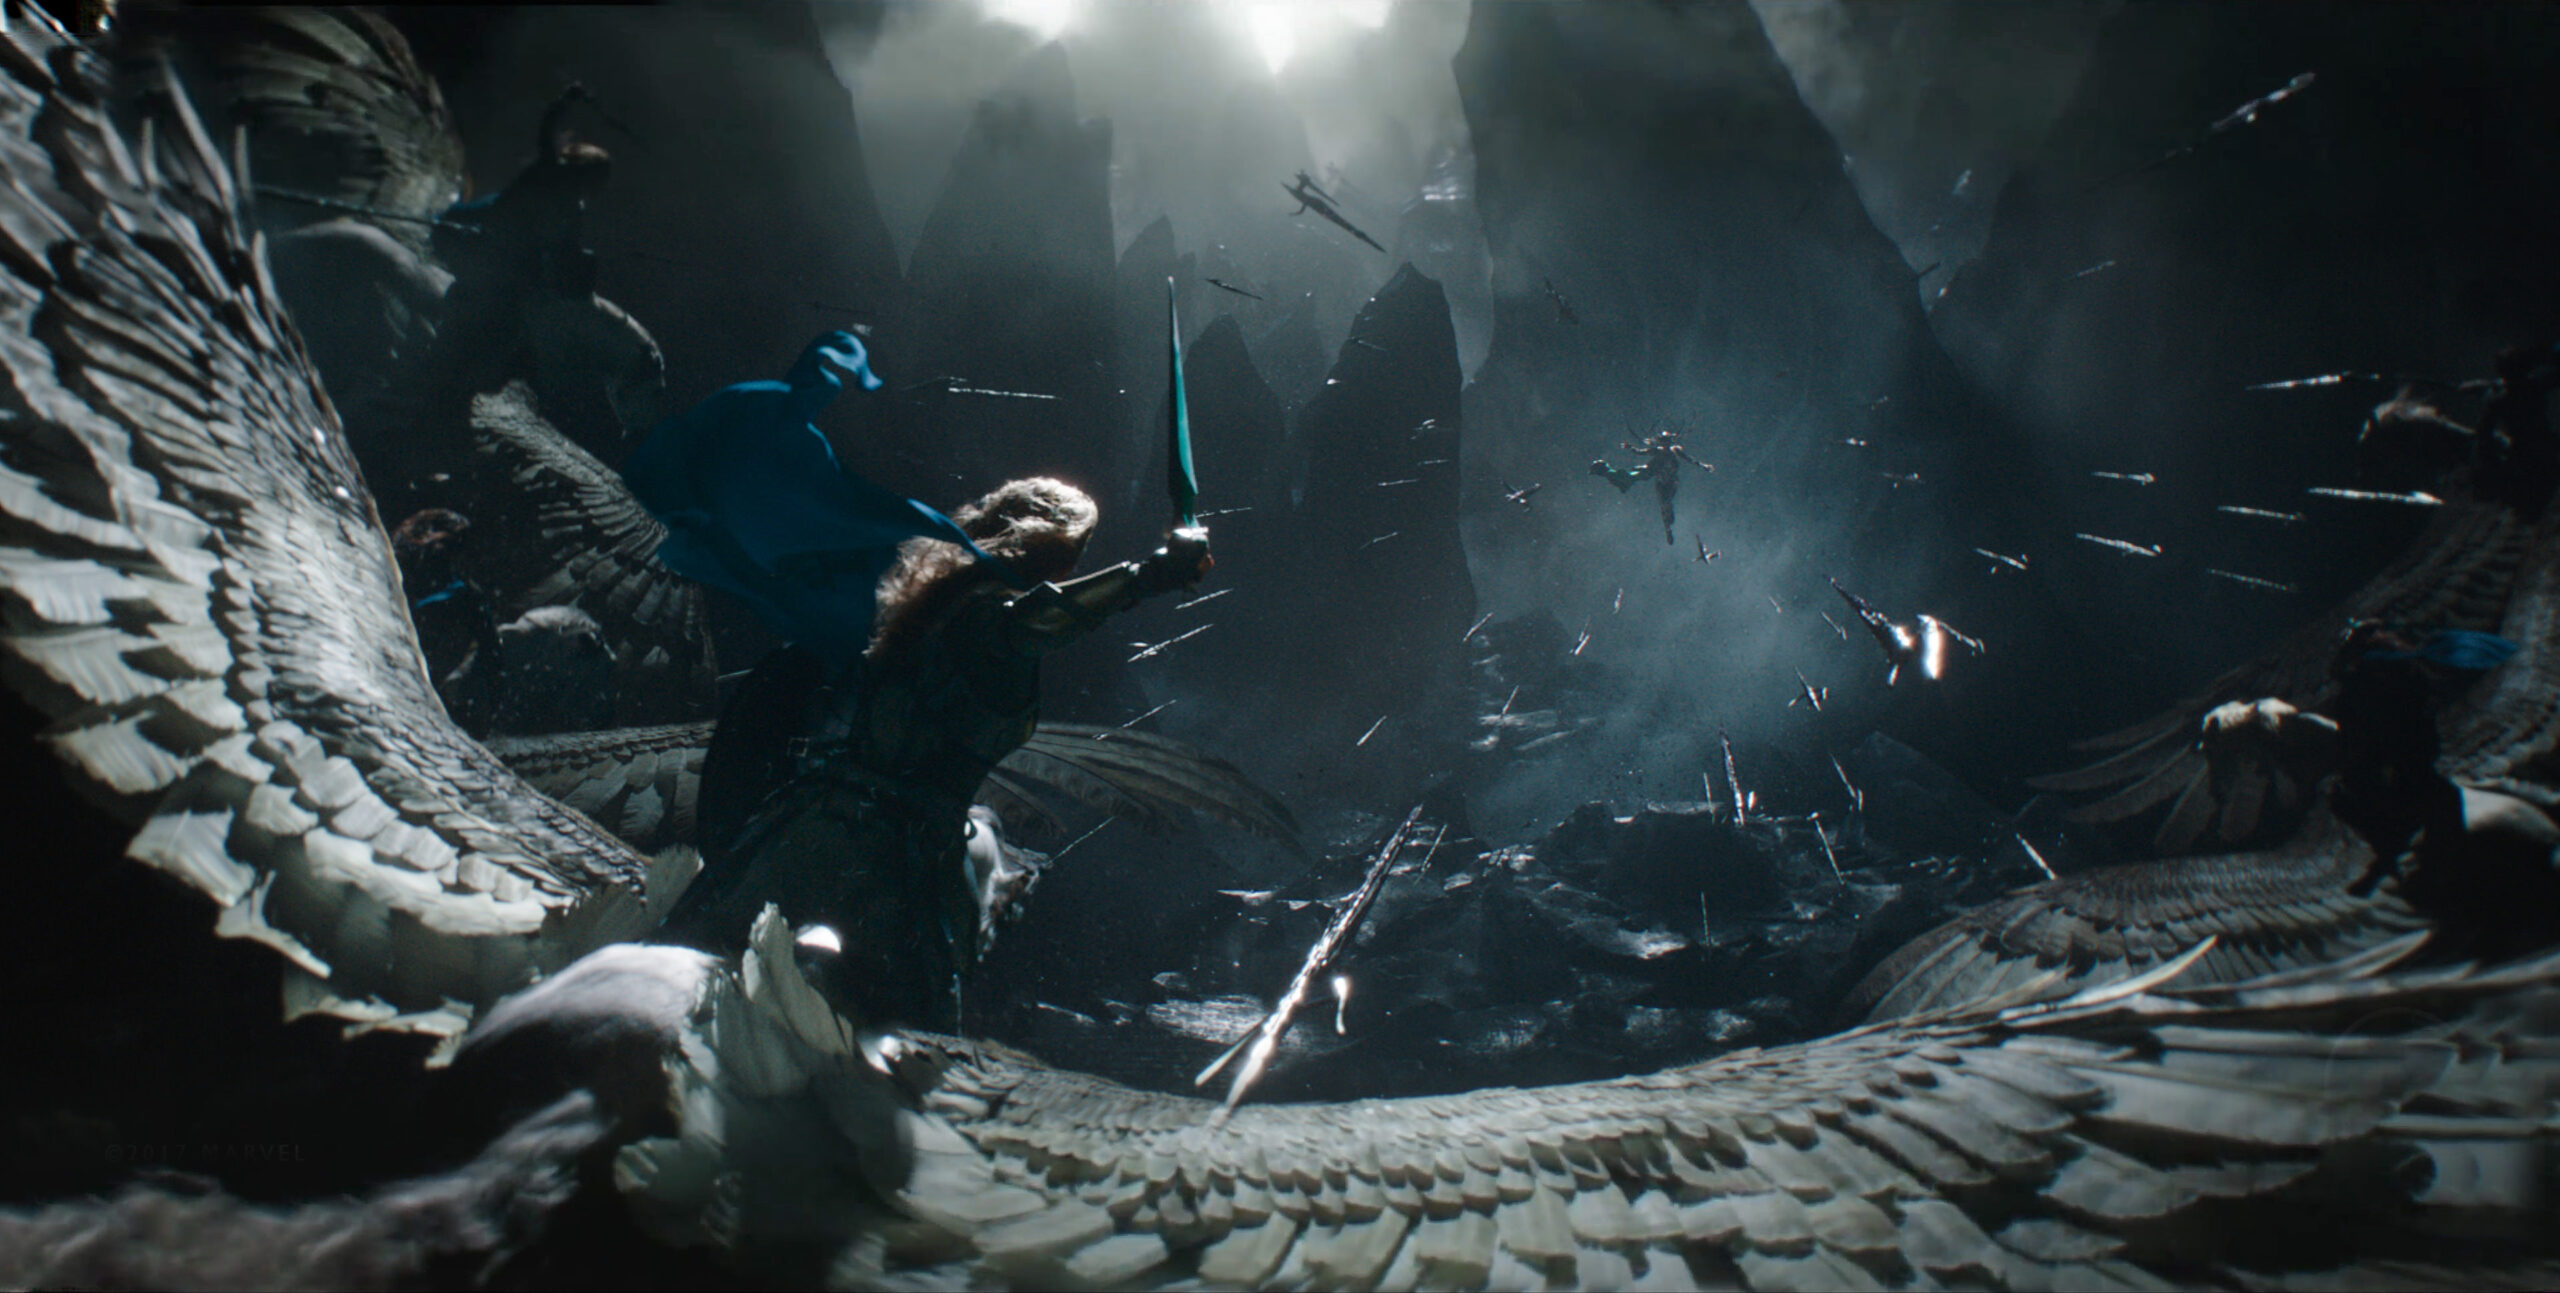 Another IMAX wallpapers from the Valkyrie flashback scene in Thor